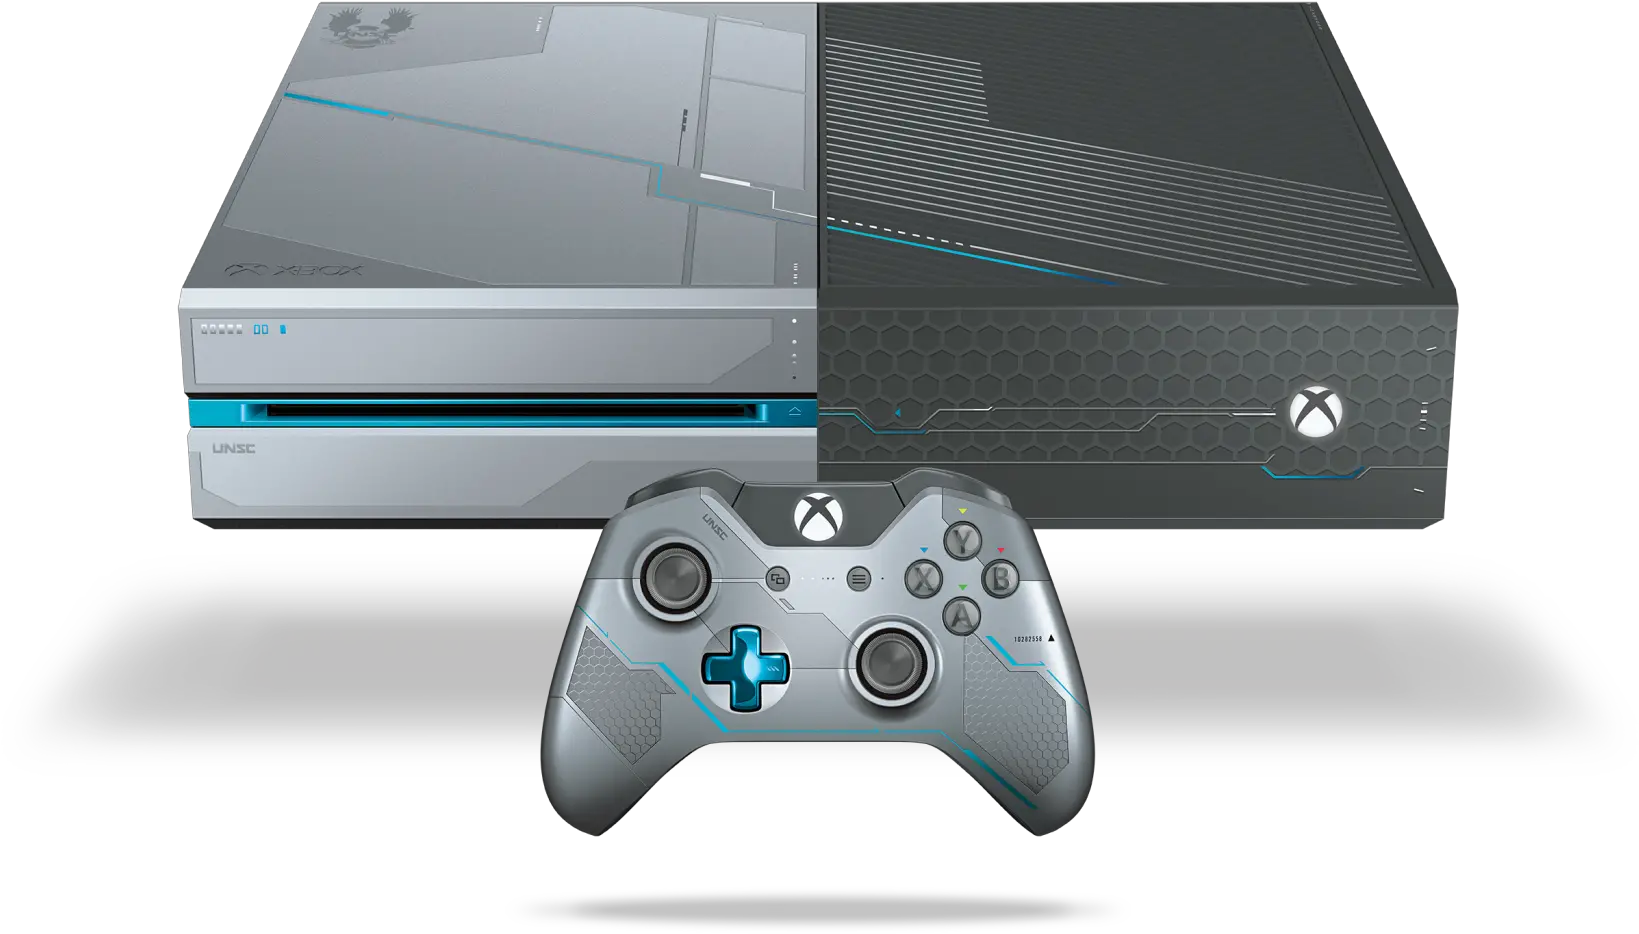 Parental Controls And Video Games A Straightforward Guide Halo 5 Xbox One Png Lock Icon On Ps4 Game